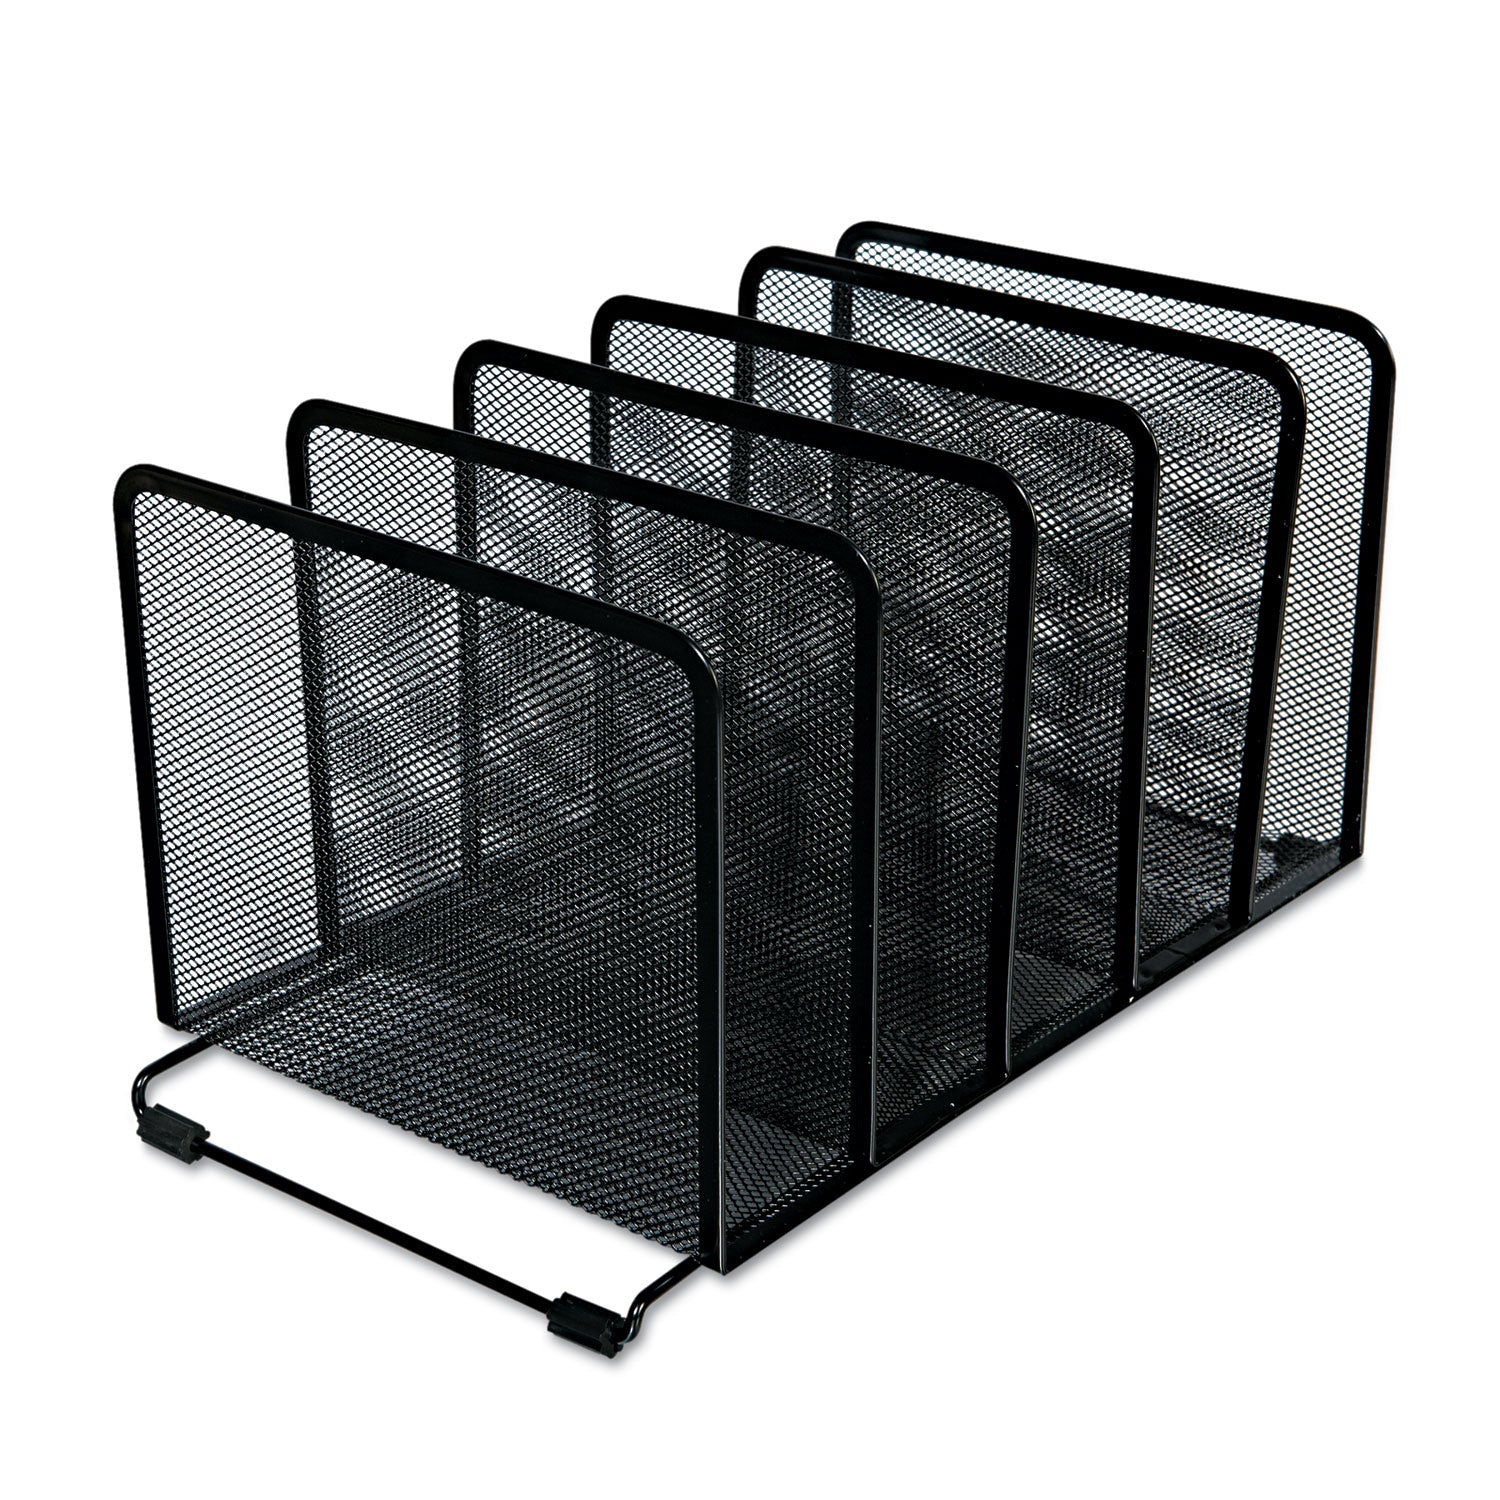 Deluxe Mesh Stacking Sorter, 5 Sections, Letter to Legal Size Files, 14.63" x 8.13" x 7.5", Black - 